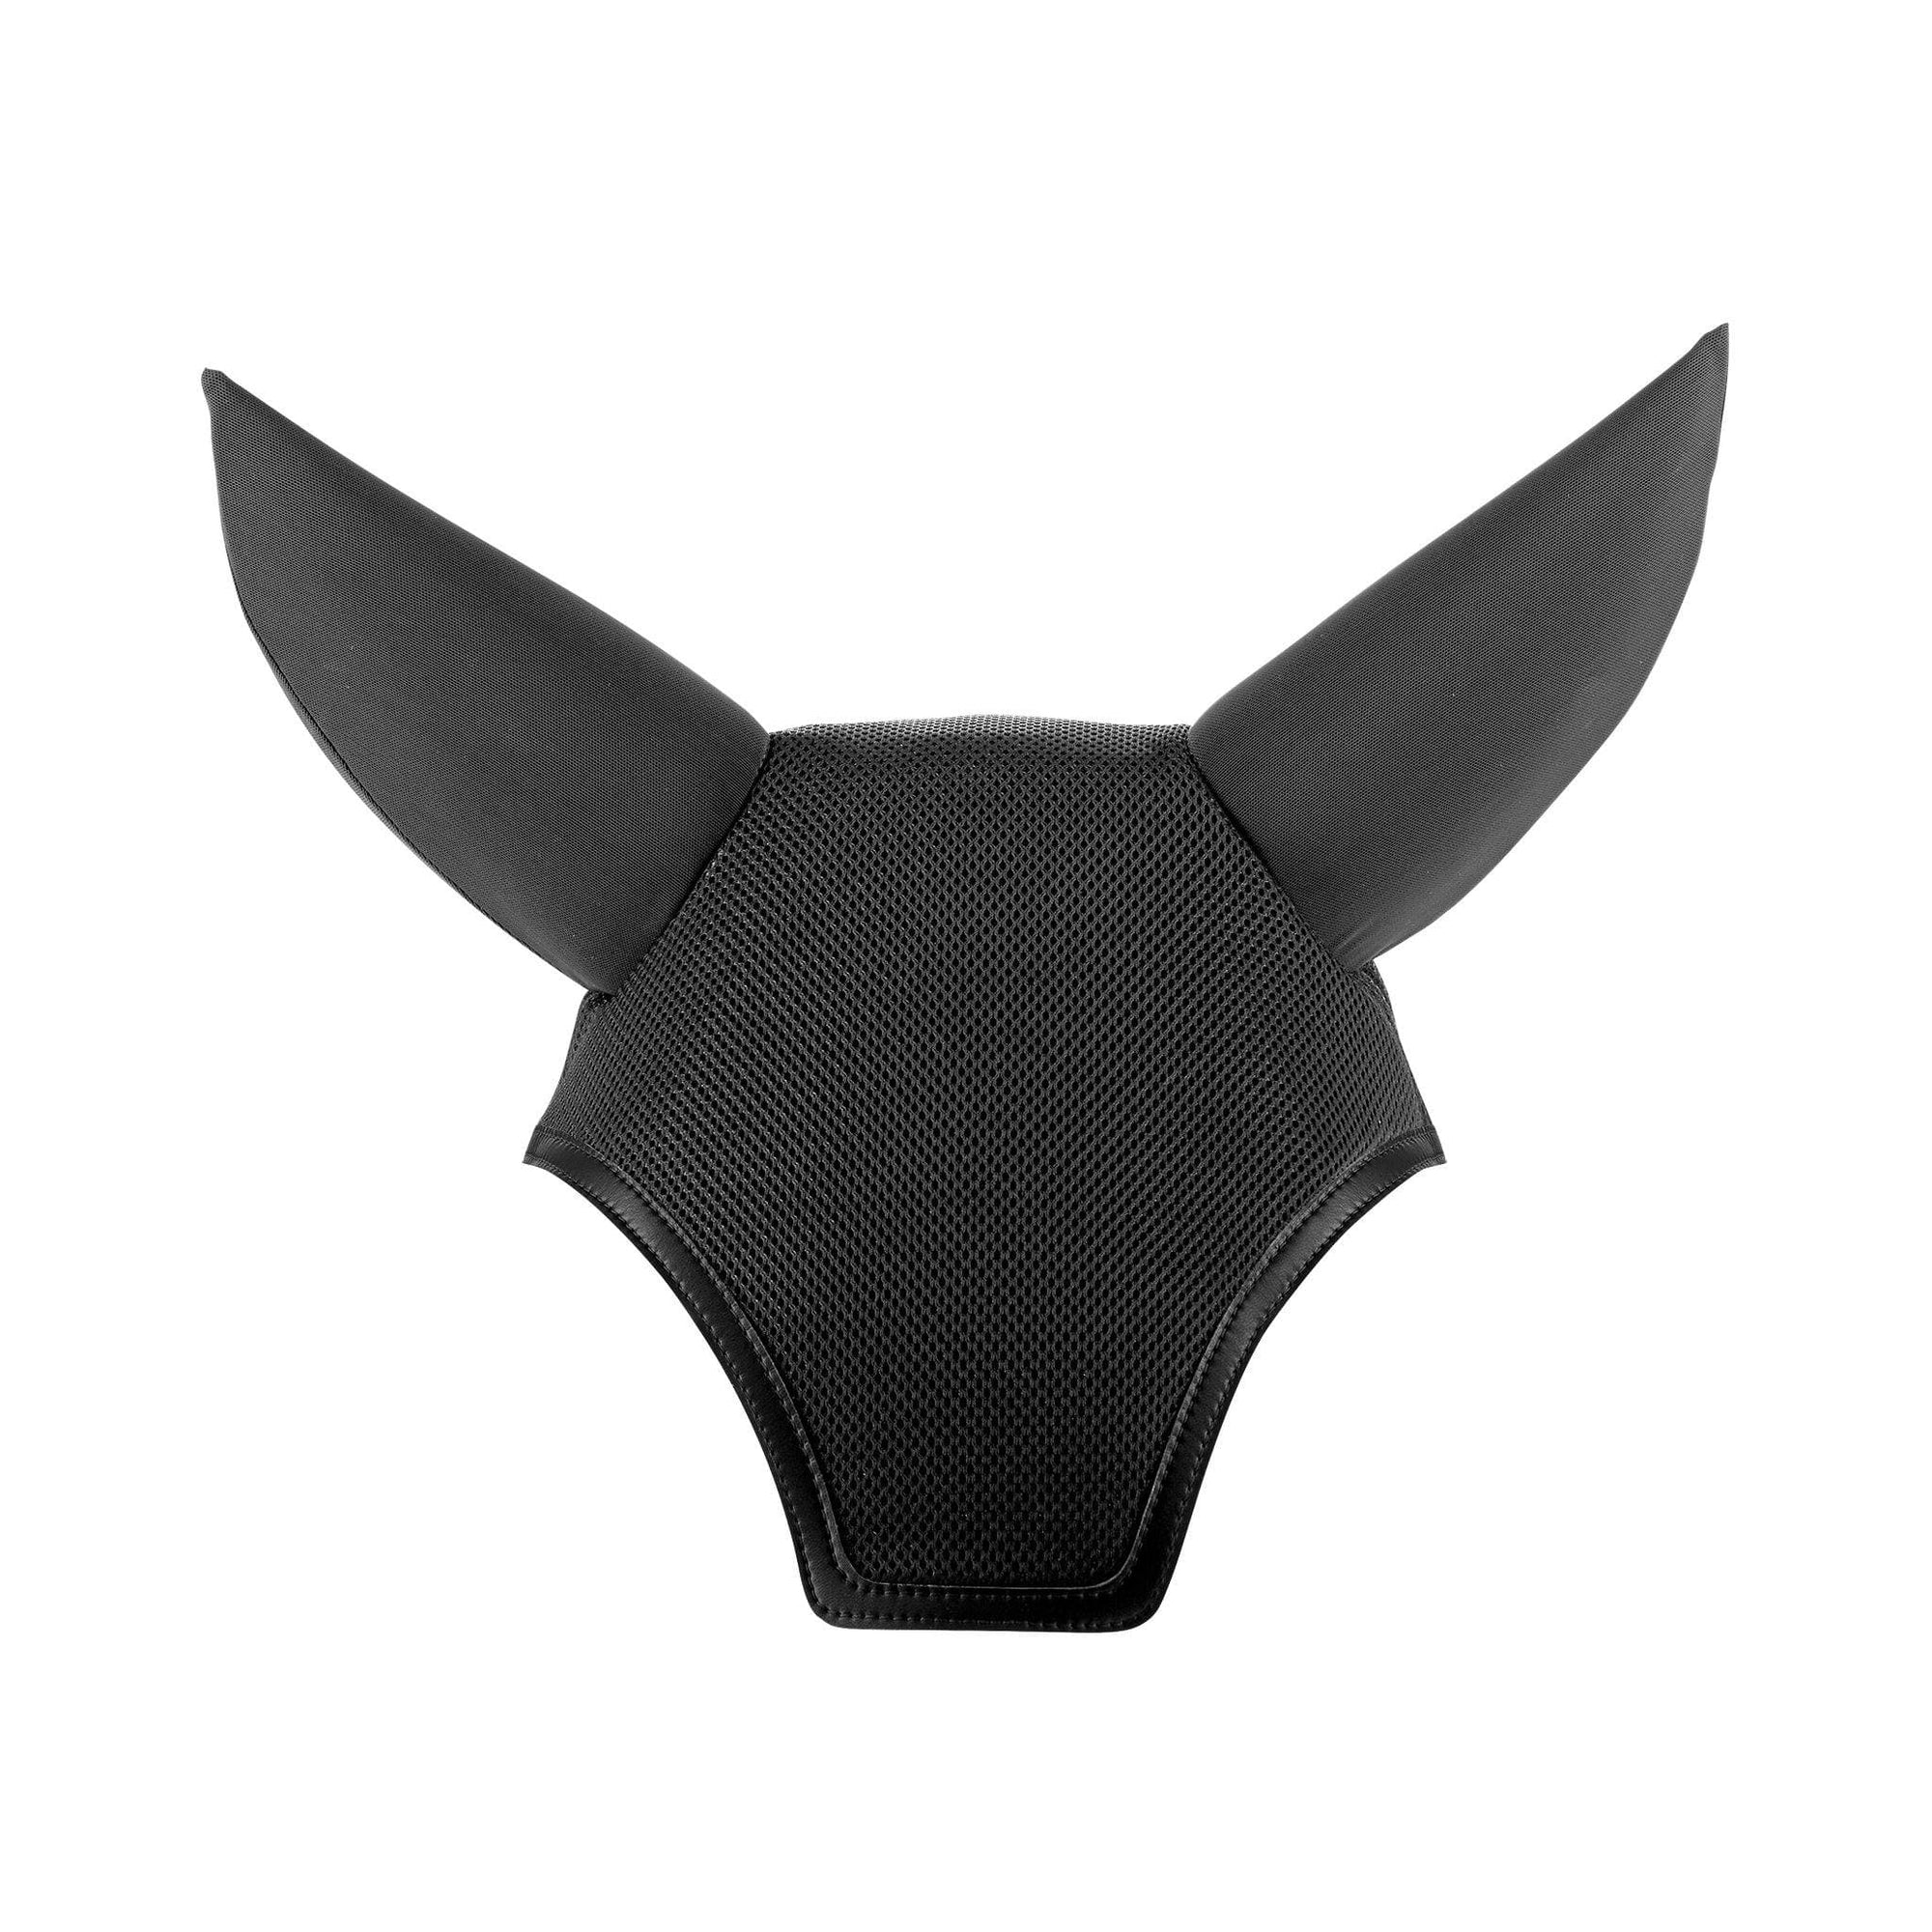 SilentFit Ear Bonnet ears are lined with an antimicrobial, neoprene free open cell foam that inhibits sound to help your horse maintain focus